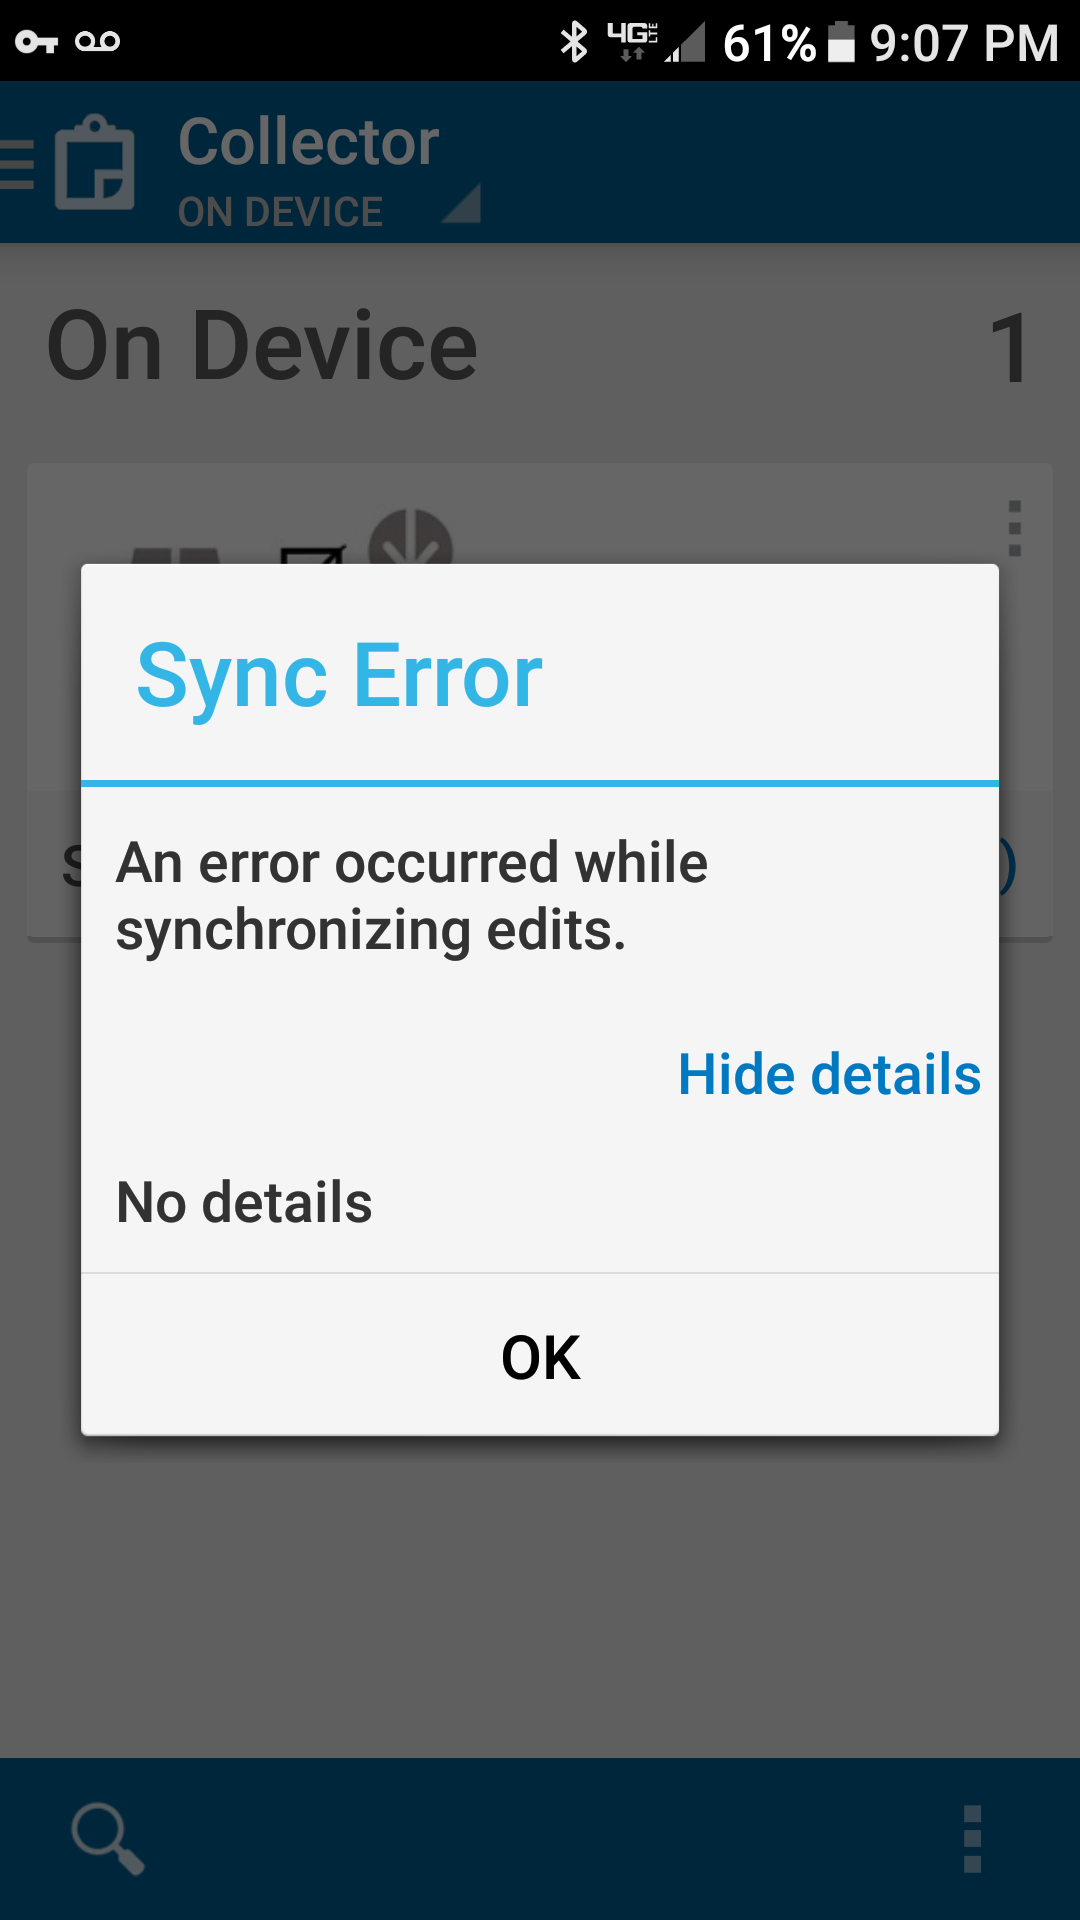 Sync Error - An error occurred while synchronizing edits.  See details - There are no details